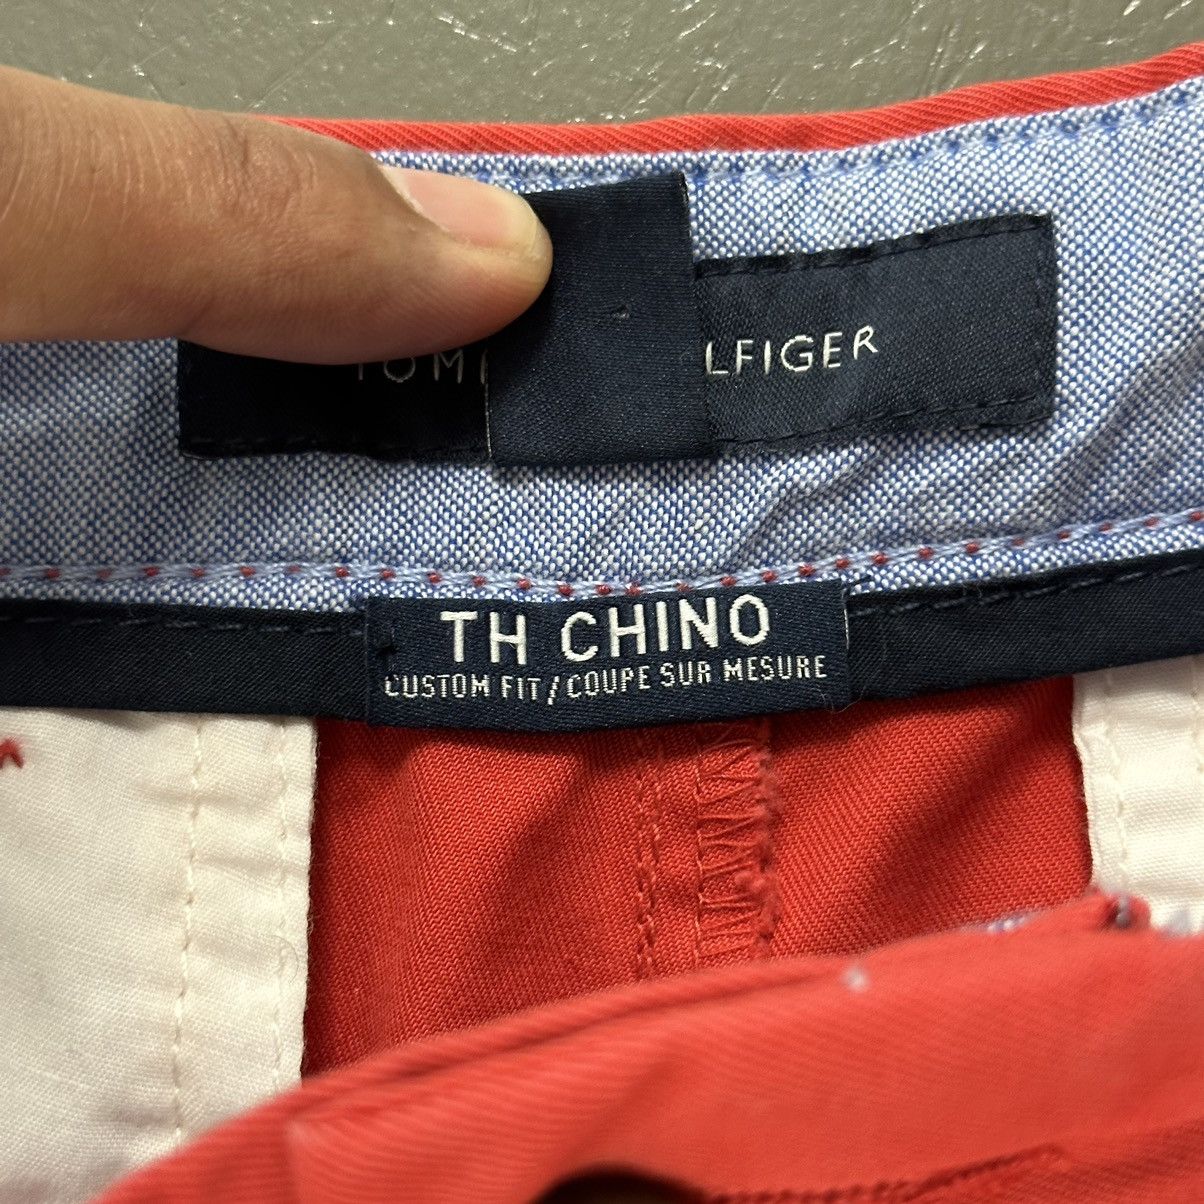 Vintage 2000s Tommy Hilfiger Chino Pants - 8